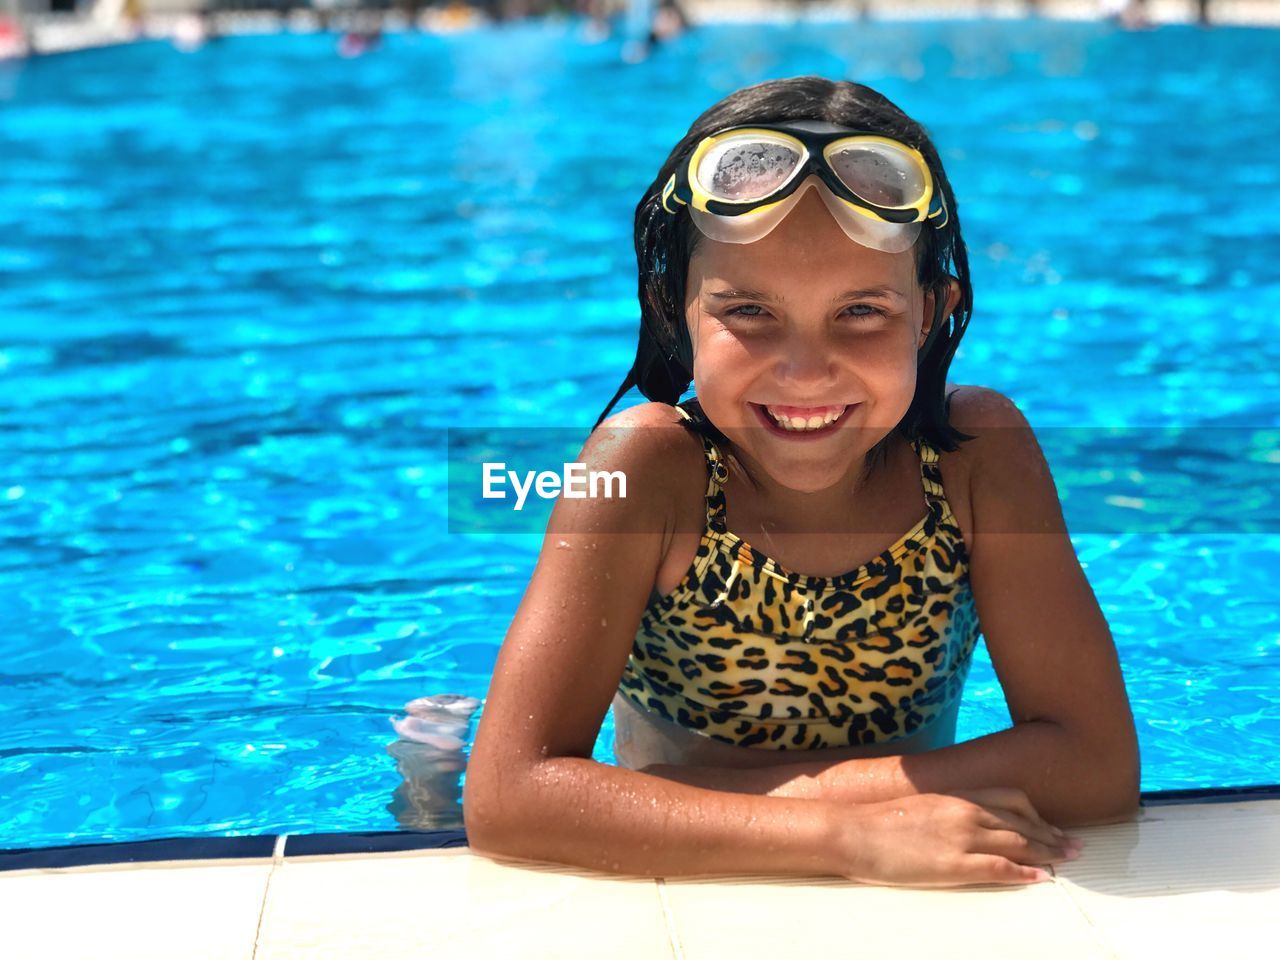 Portrait of smiling girl in swimming pool on sunny day